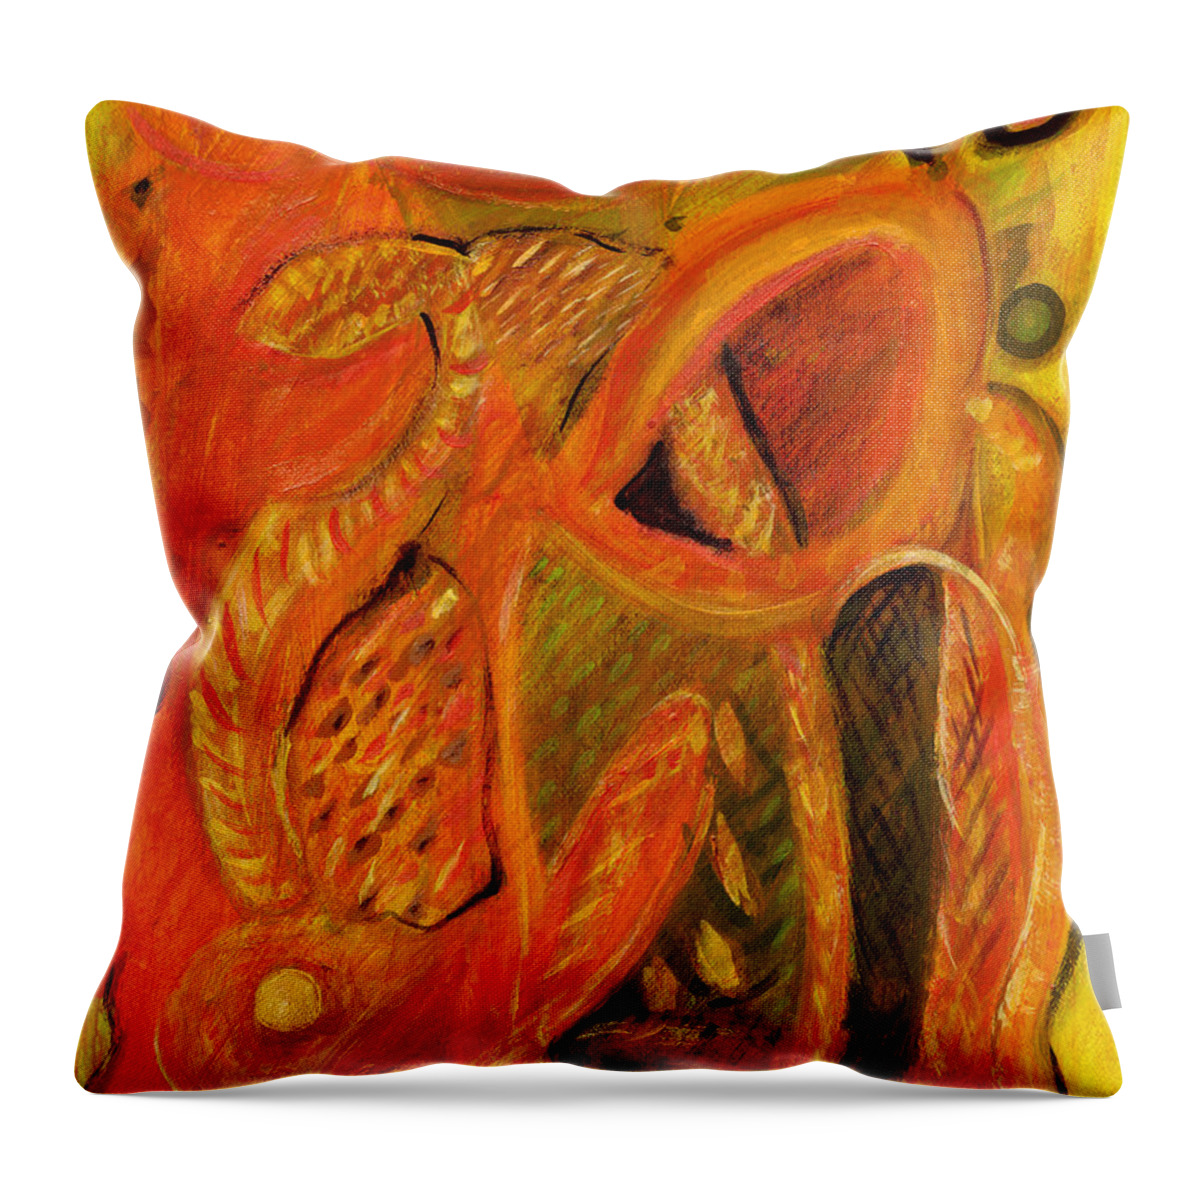 Abstract Art Throw Pillow featuring the painting The Mirage by Stephen Lucas